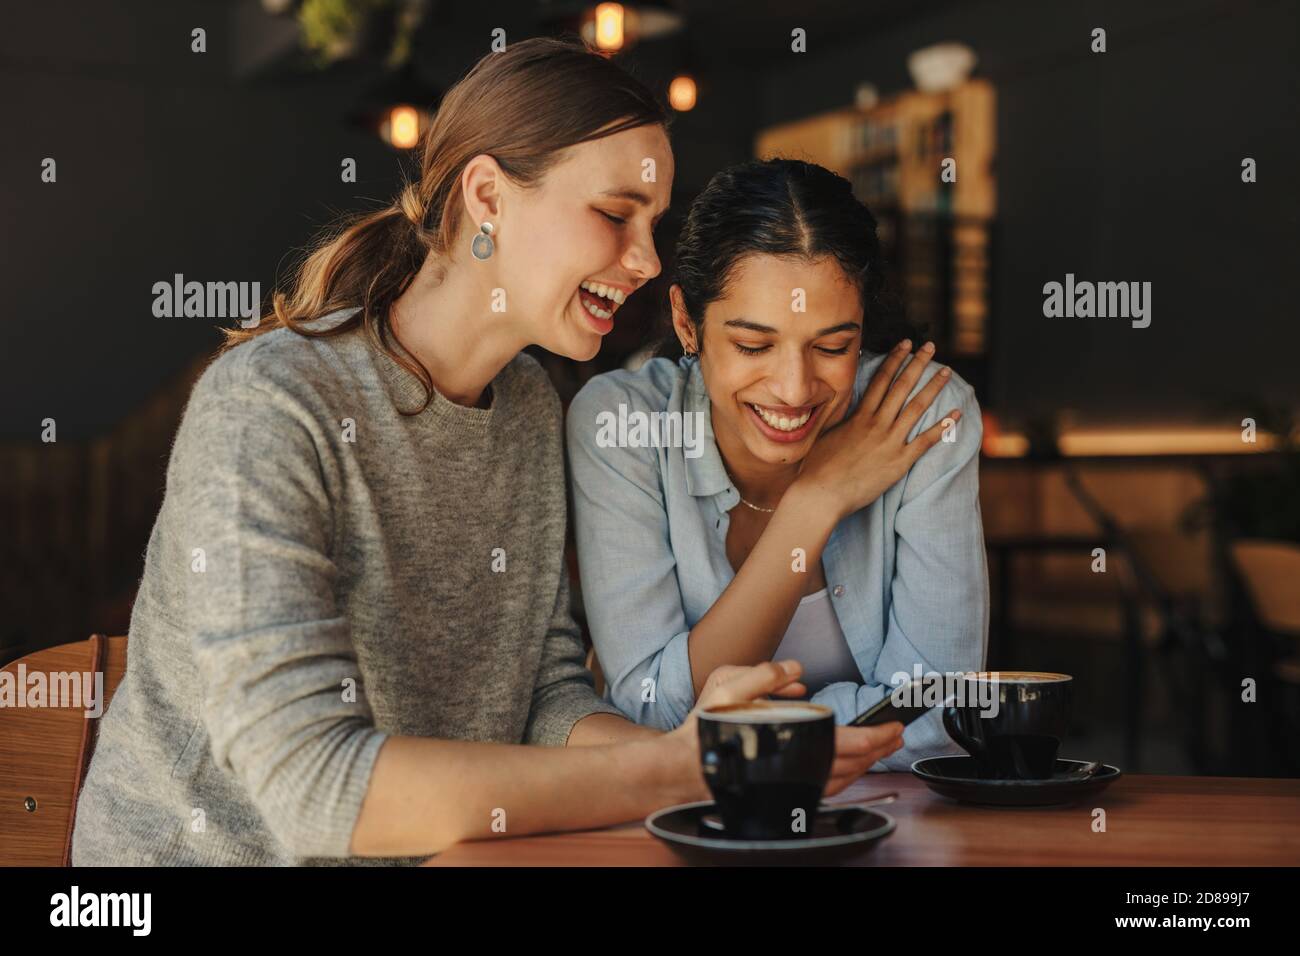 Woman showing funny posts on her cell phone to her friend and smiling. Two female friends sitting in coffeeshop using a cell phone and smiling. Stock Photo